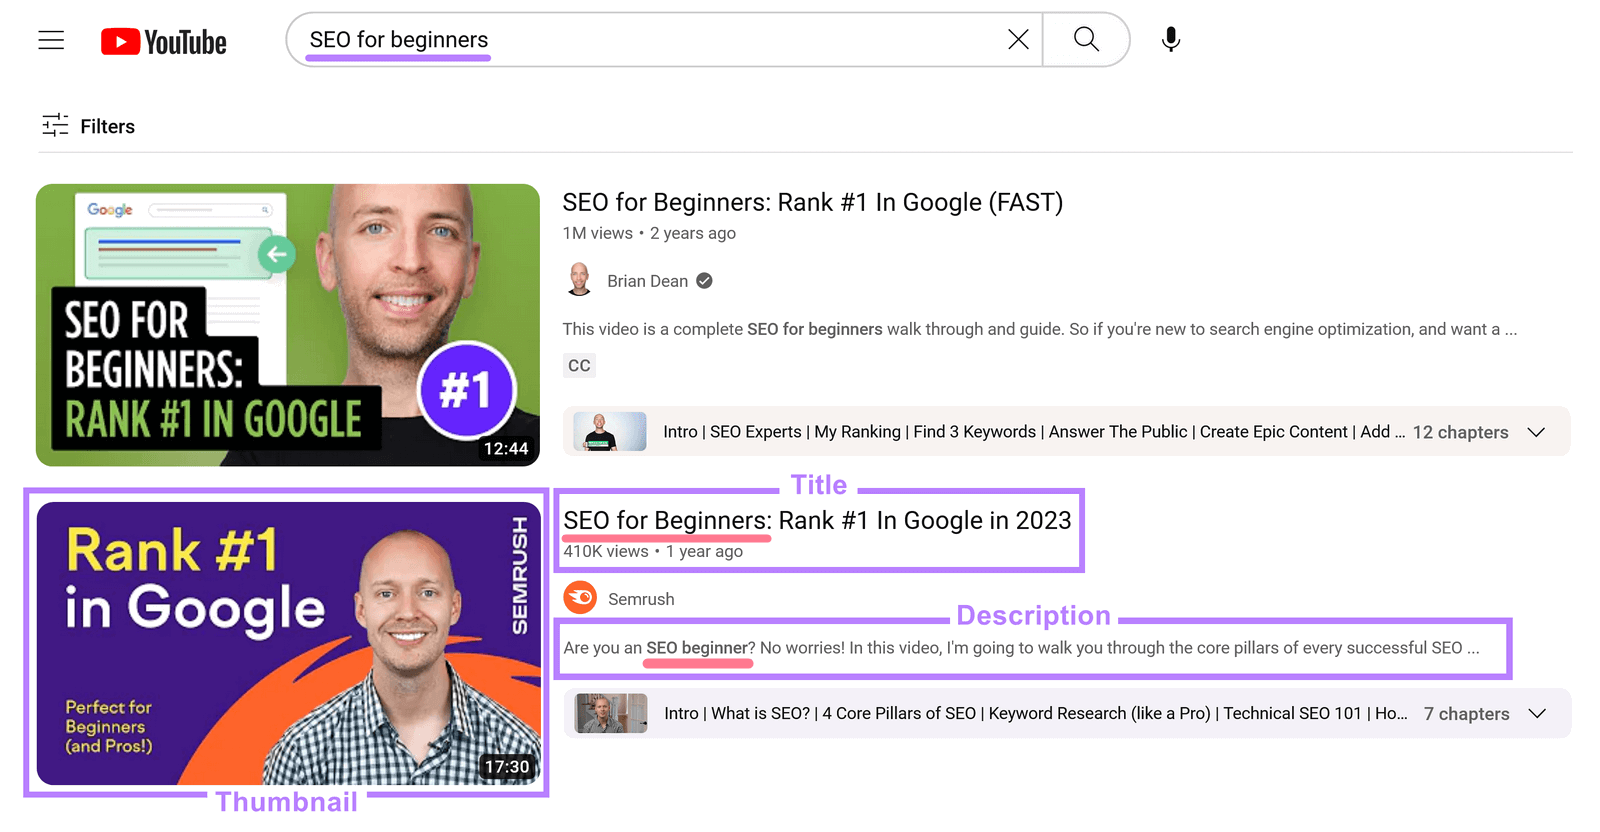 "SEO for beginners" search on YouTube